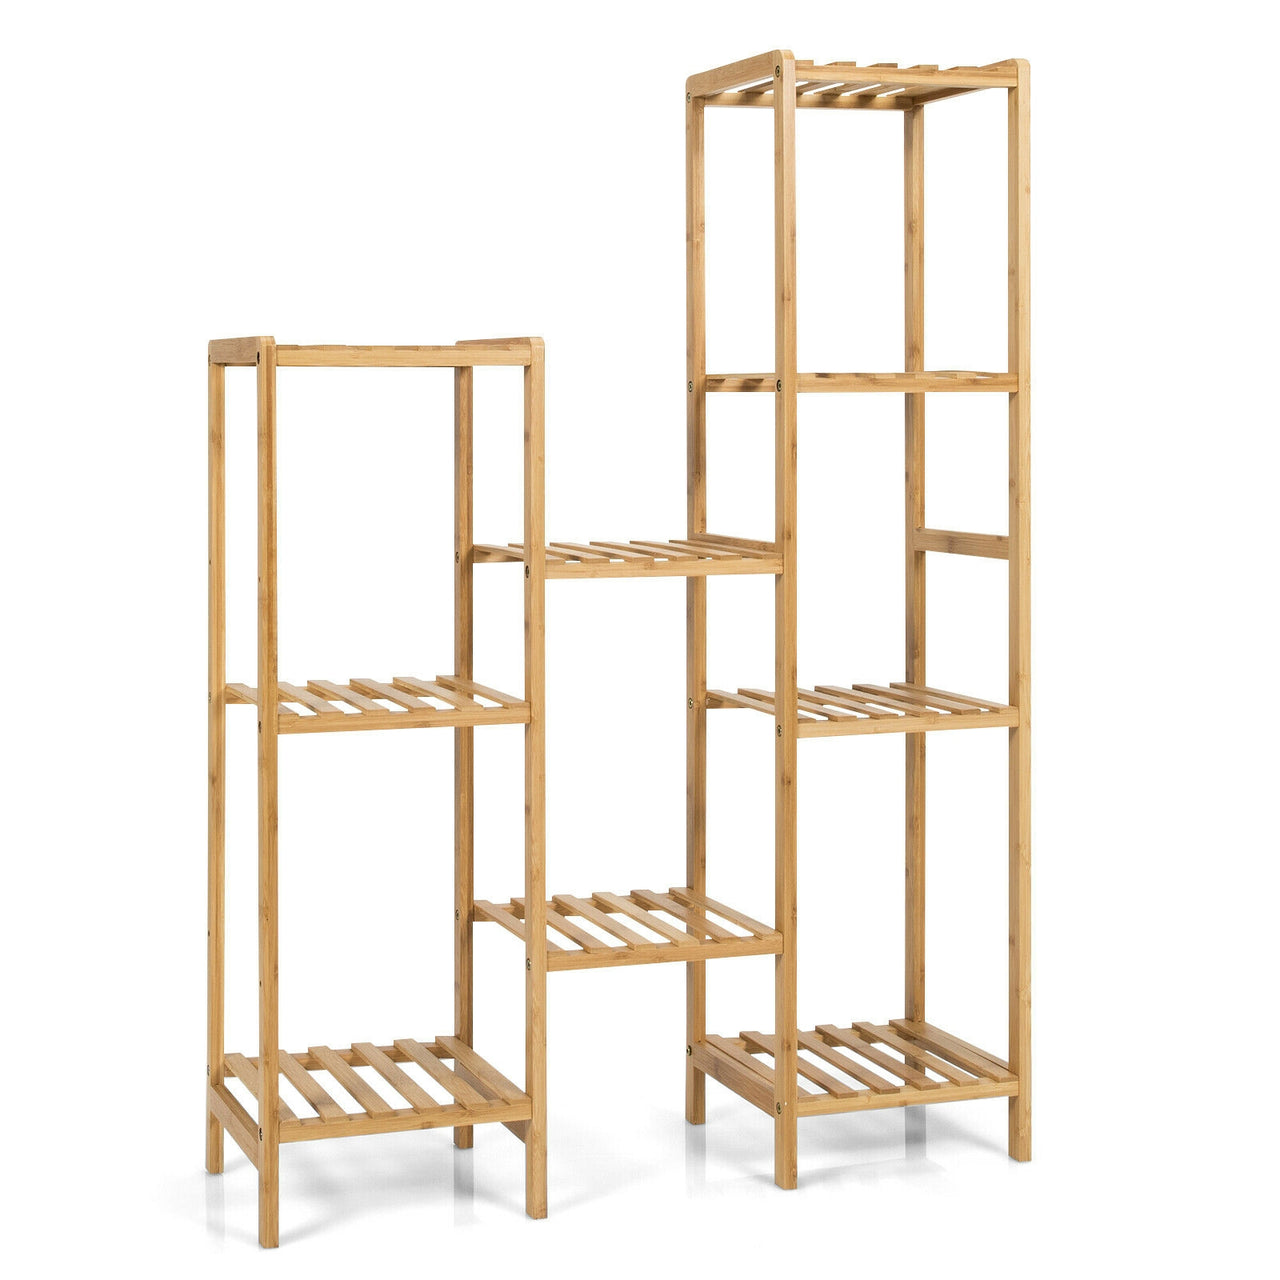 9/11-Tier Bamboo Plant Stand for Living Room Balcony Garden - Gallery View 1 of 10